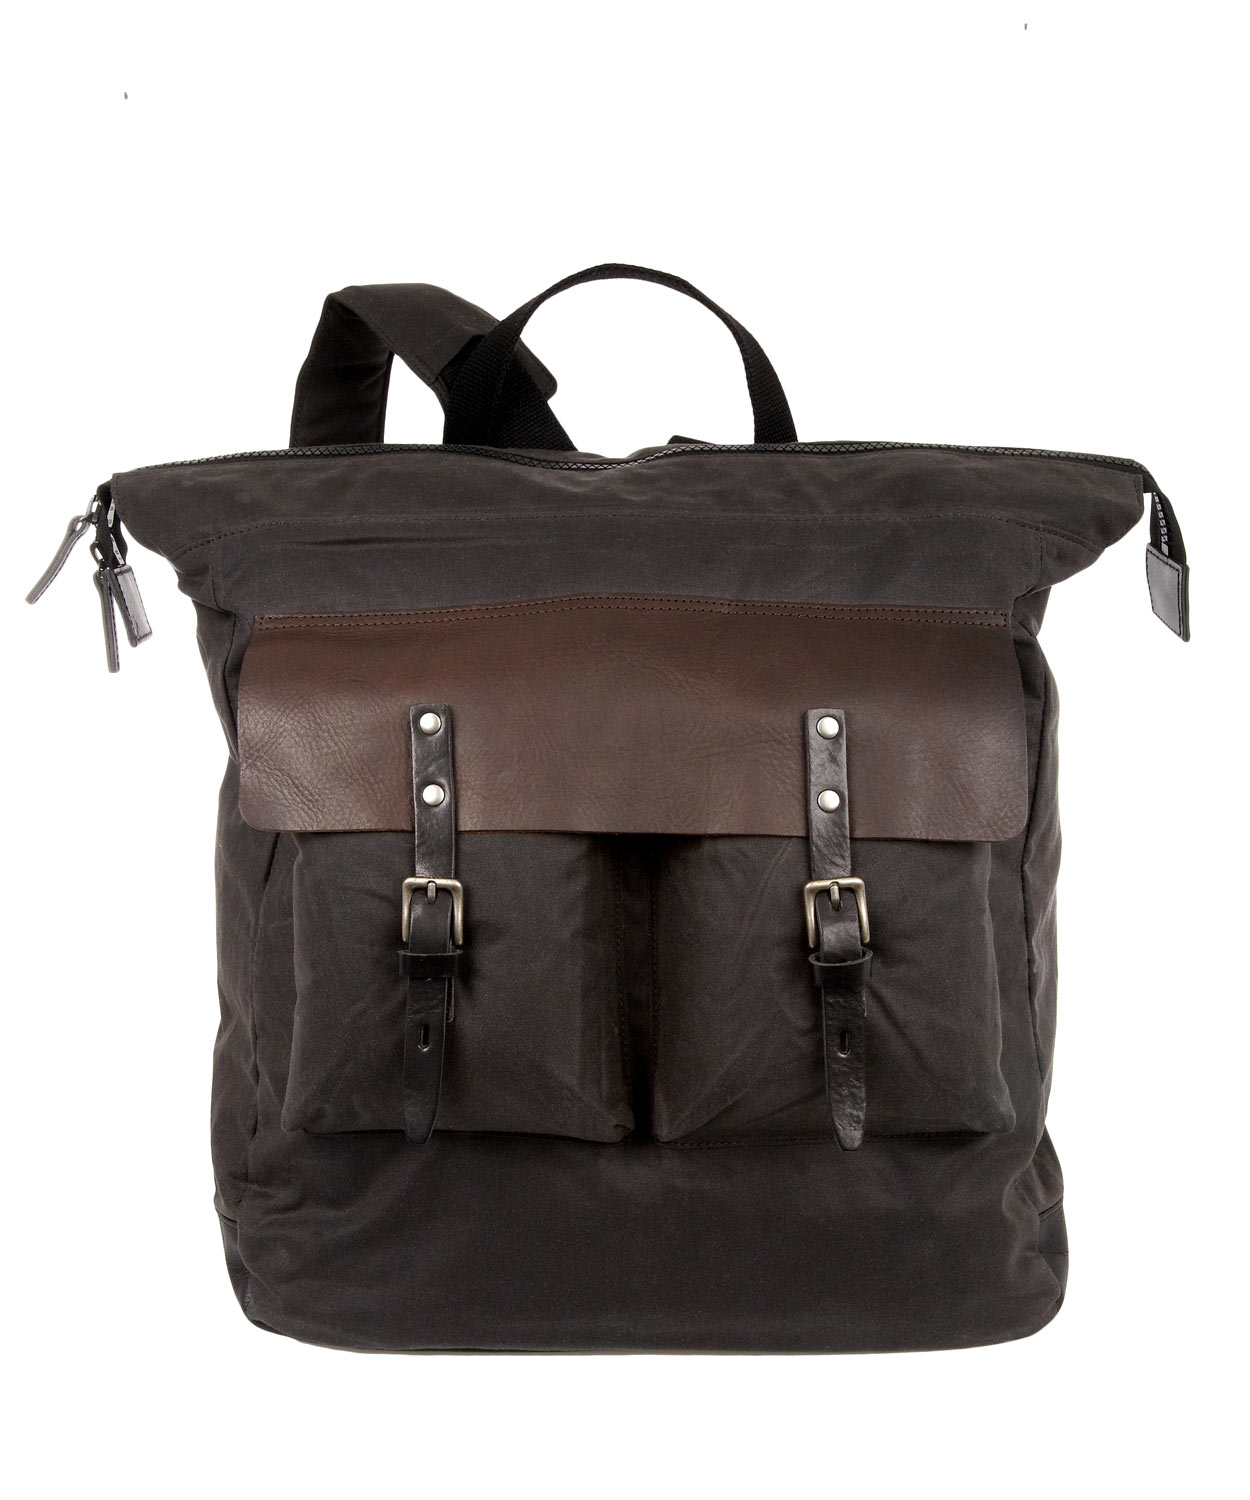 Lyst - Ally Capellino Igor Luxe Waxed Cotton Backpack in Gray for Men